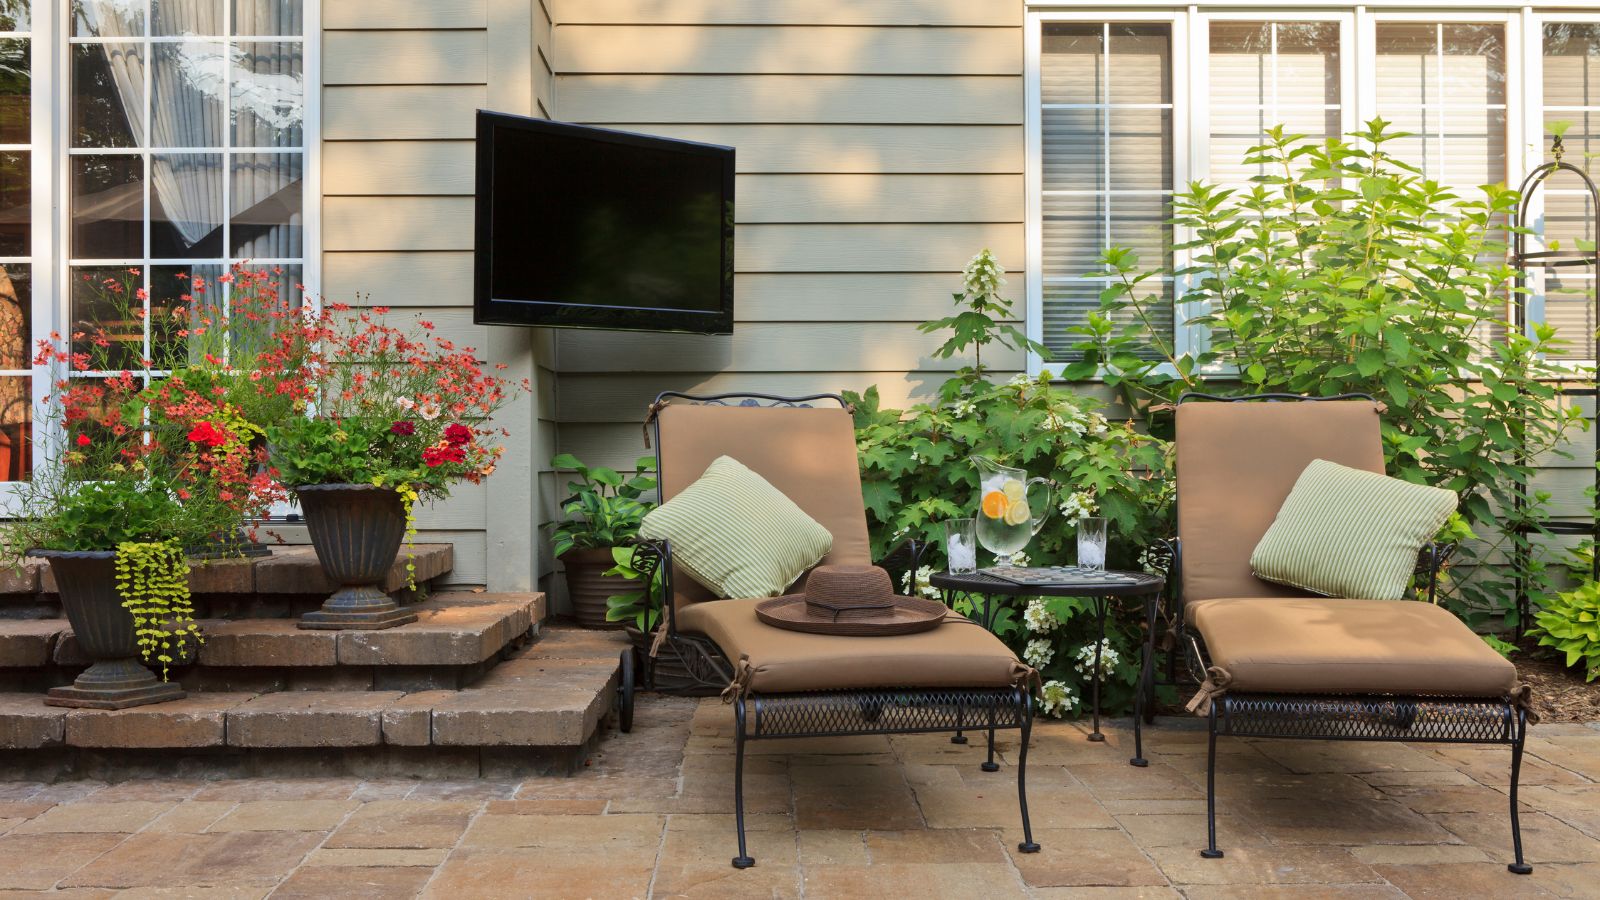 Add Some Personality to Your Backyard
